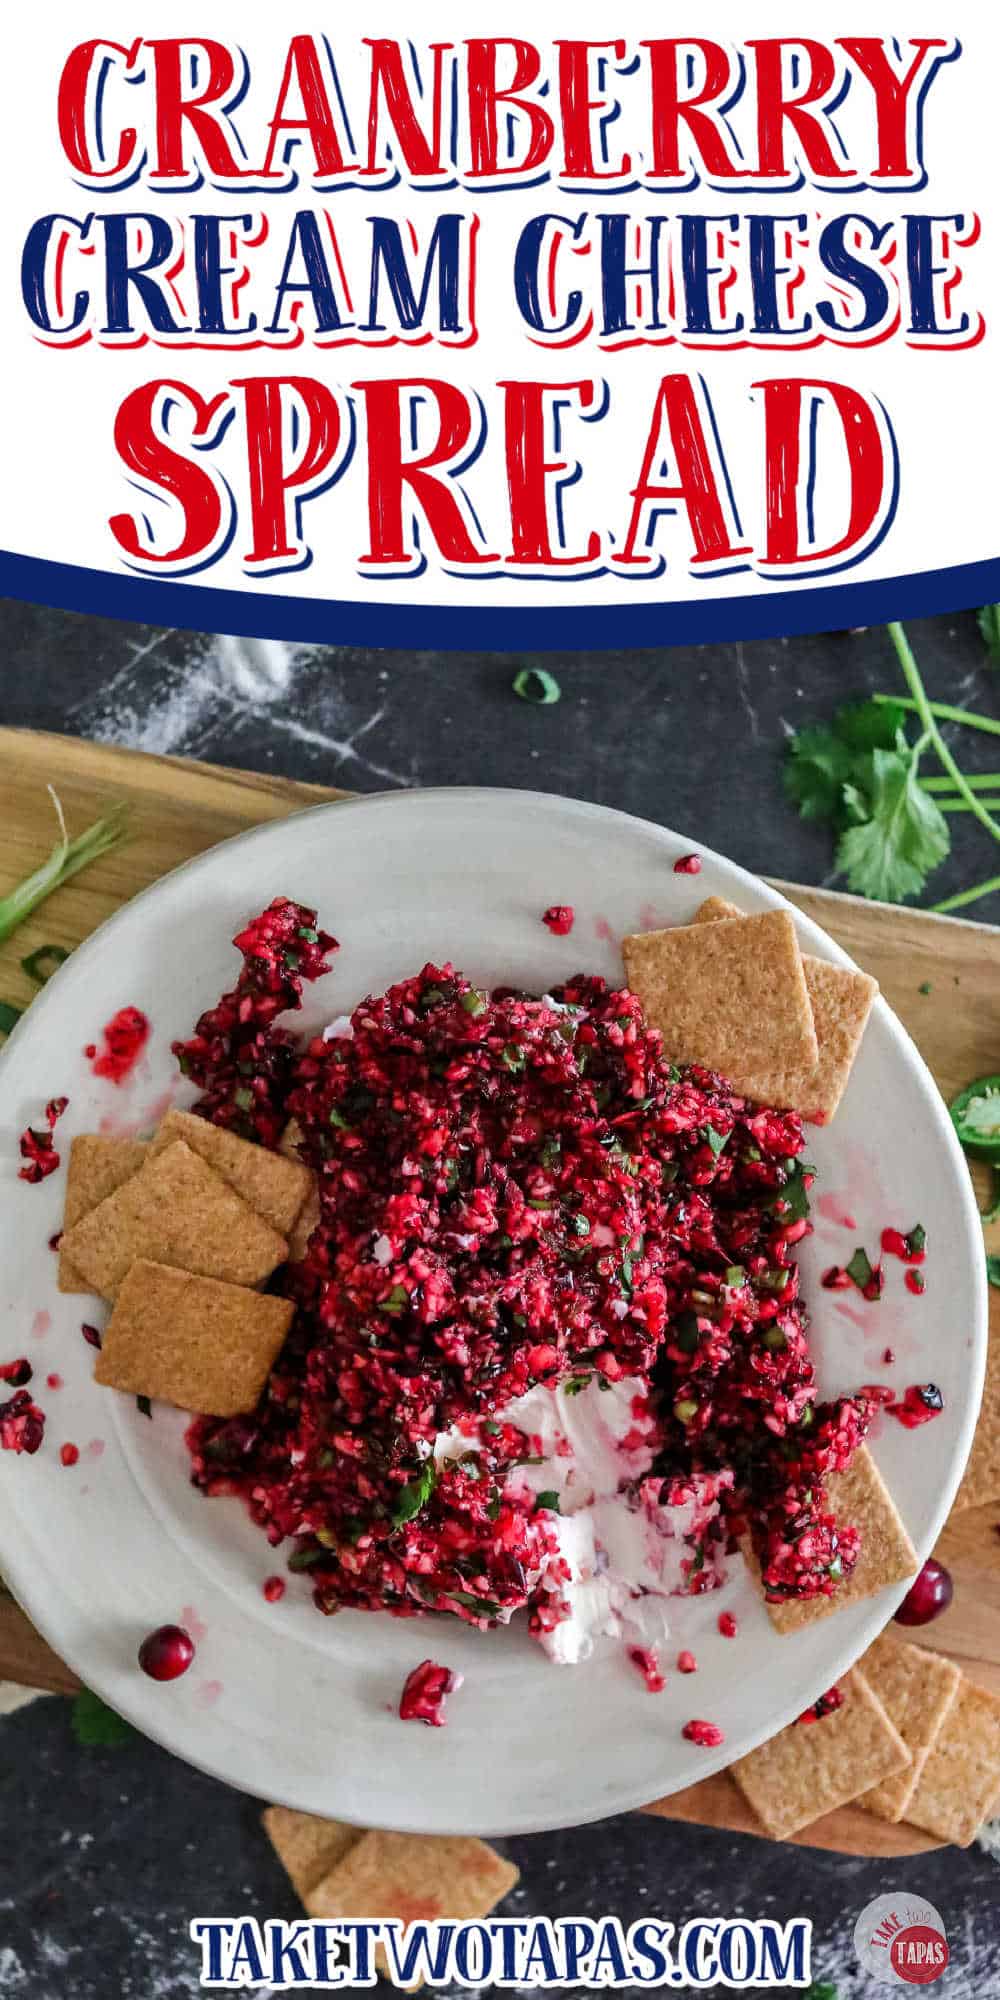 cranberry cream cheese dip with text "spread"